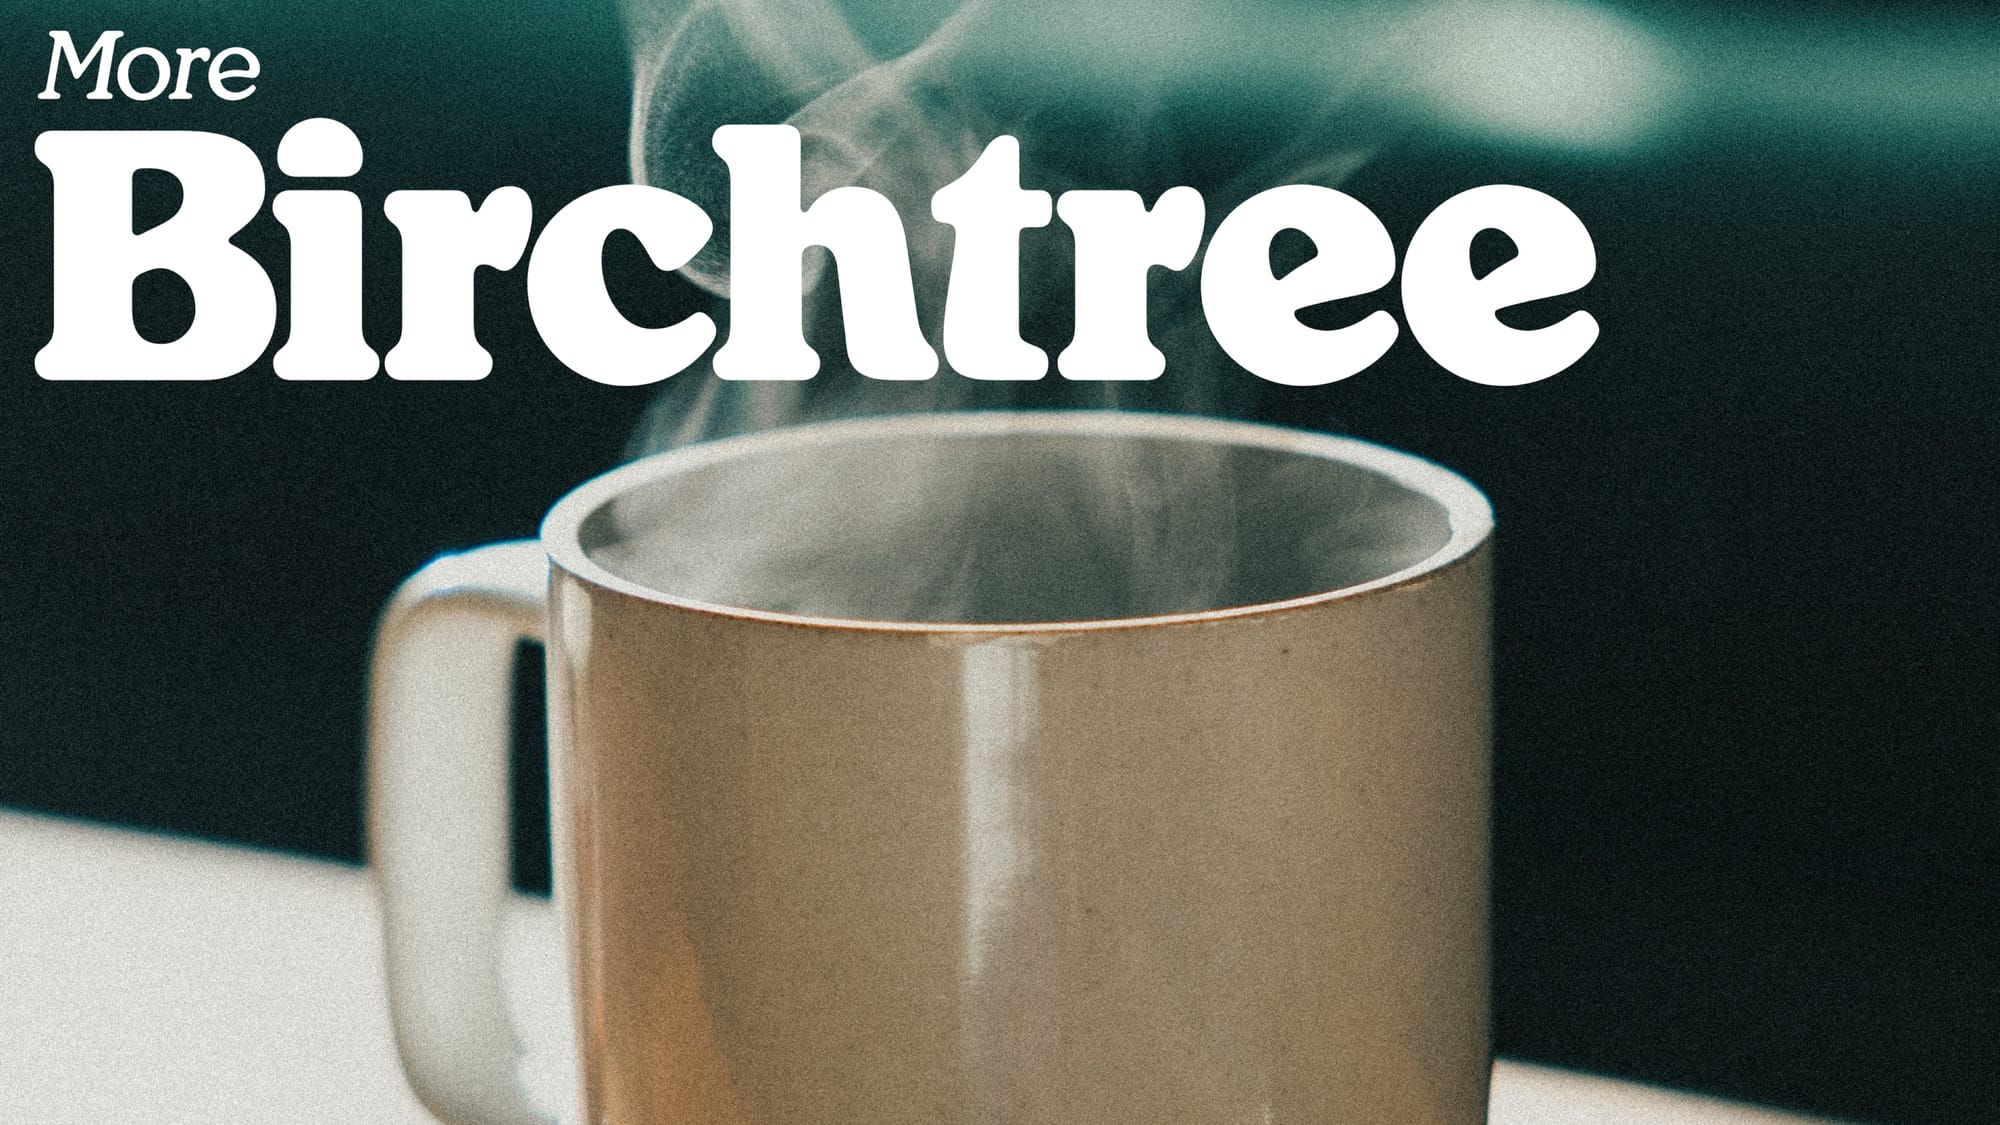 Introducing More Birchtree